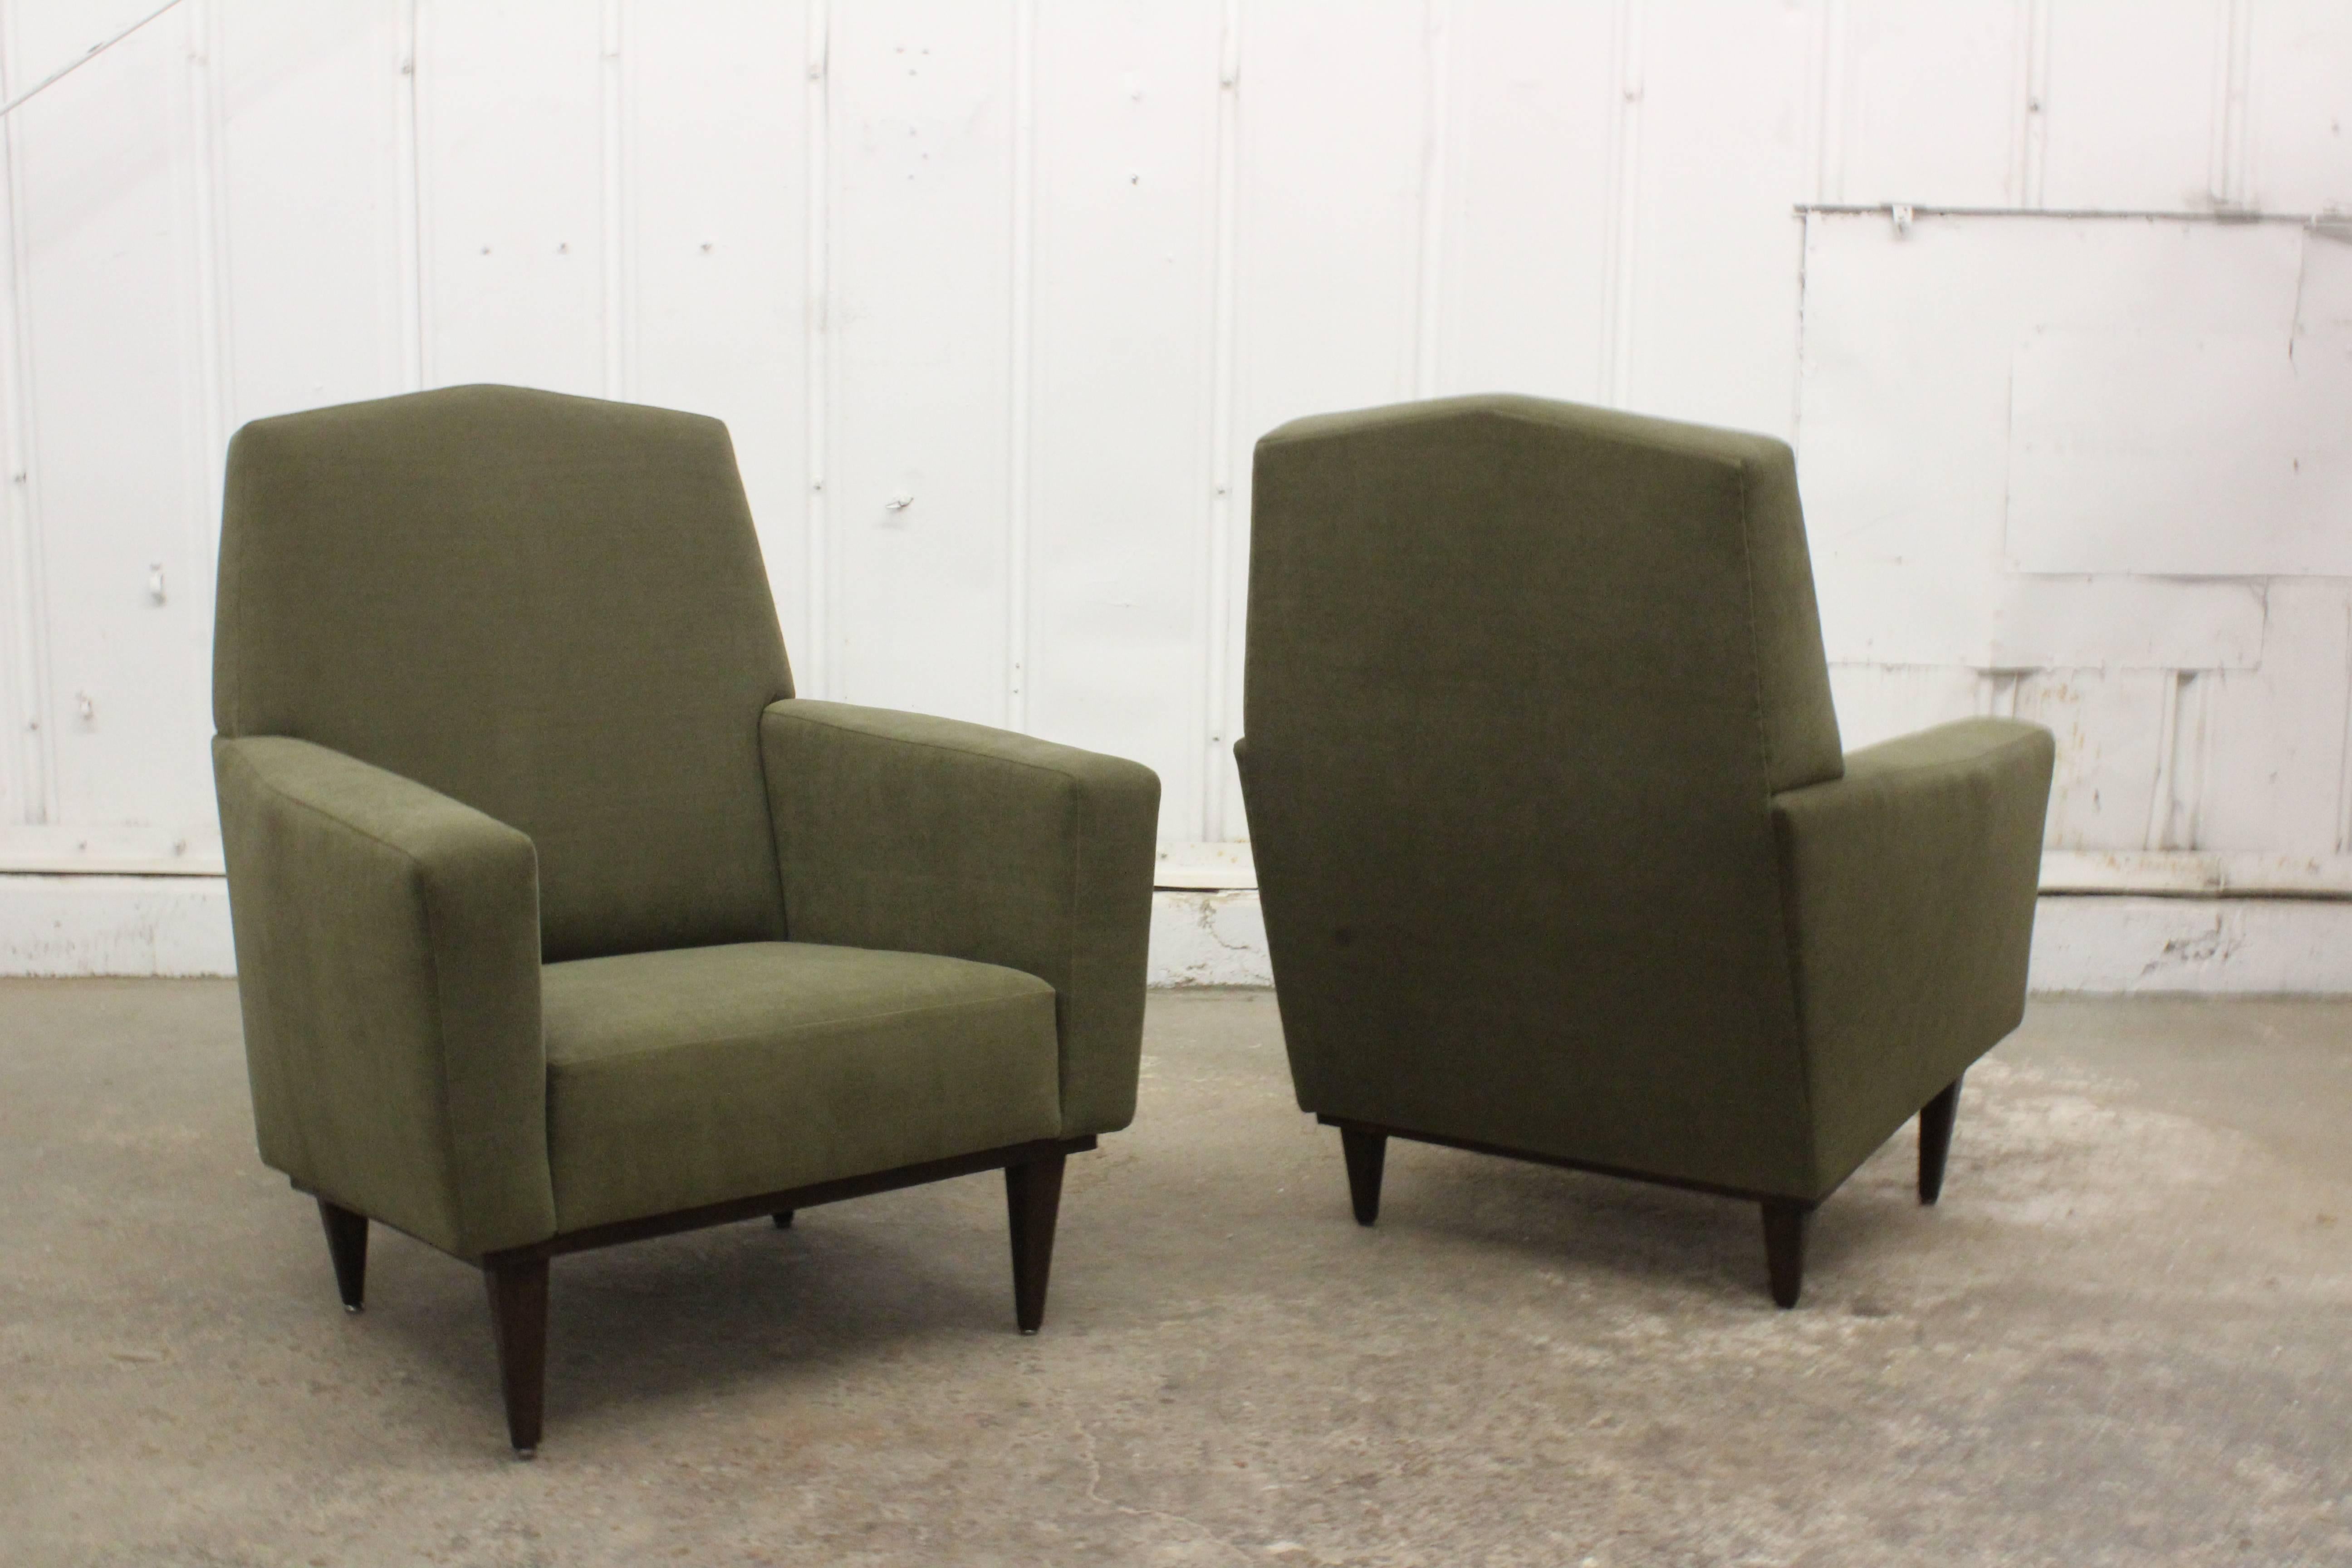 Pair of 1950s French armchairs with modern lines and walnut legs. The pair feature a soft new olive green chenille upholstery.